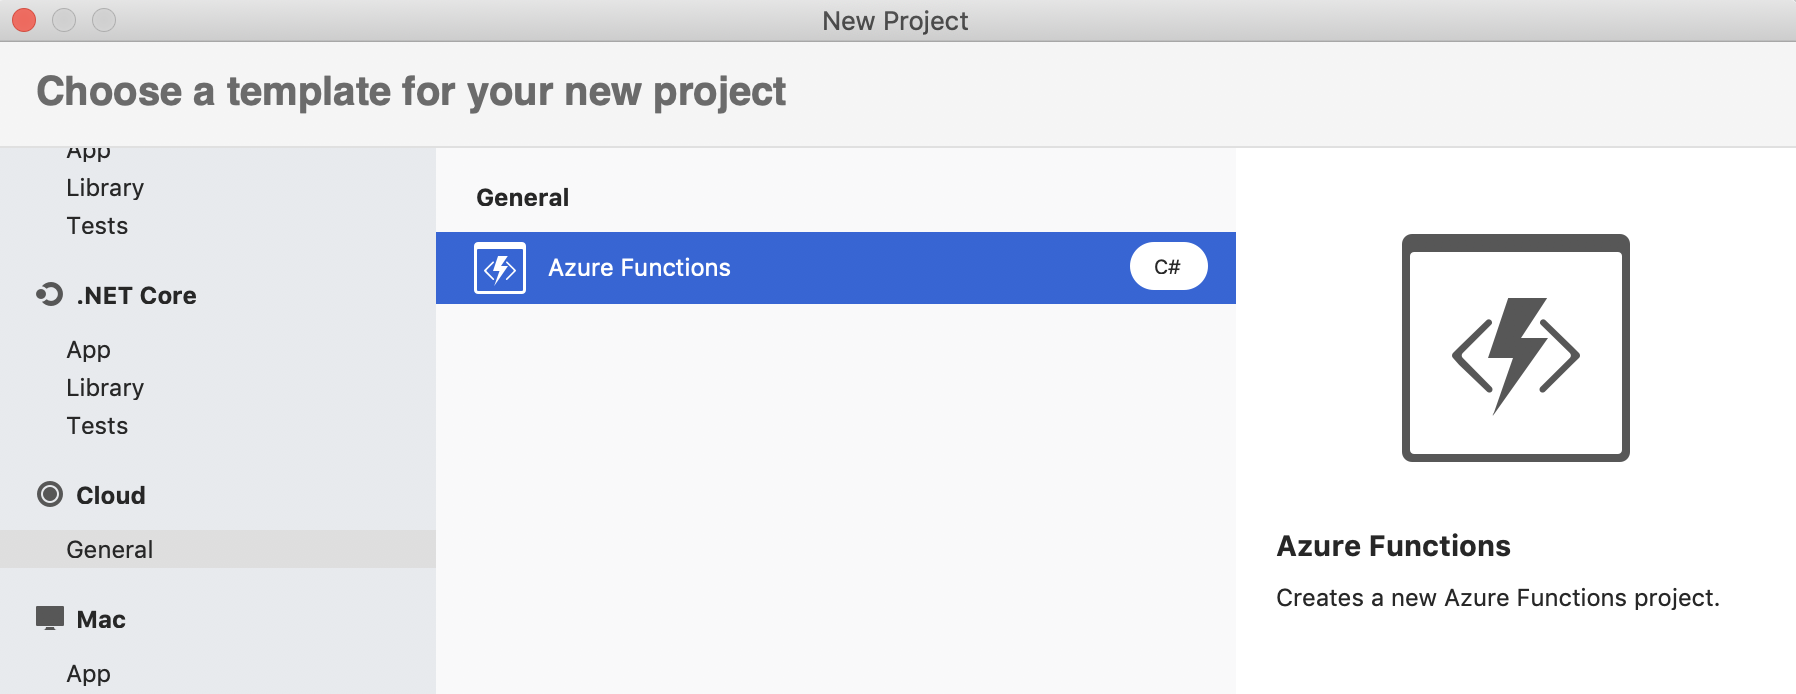 New Project dialog showing Azure Functions option